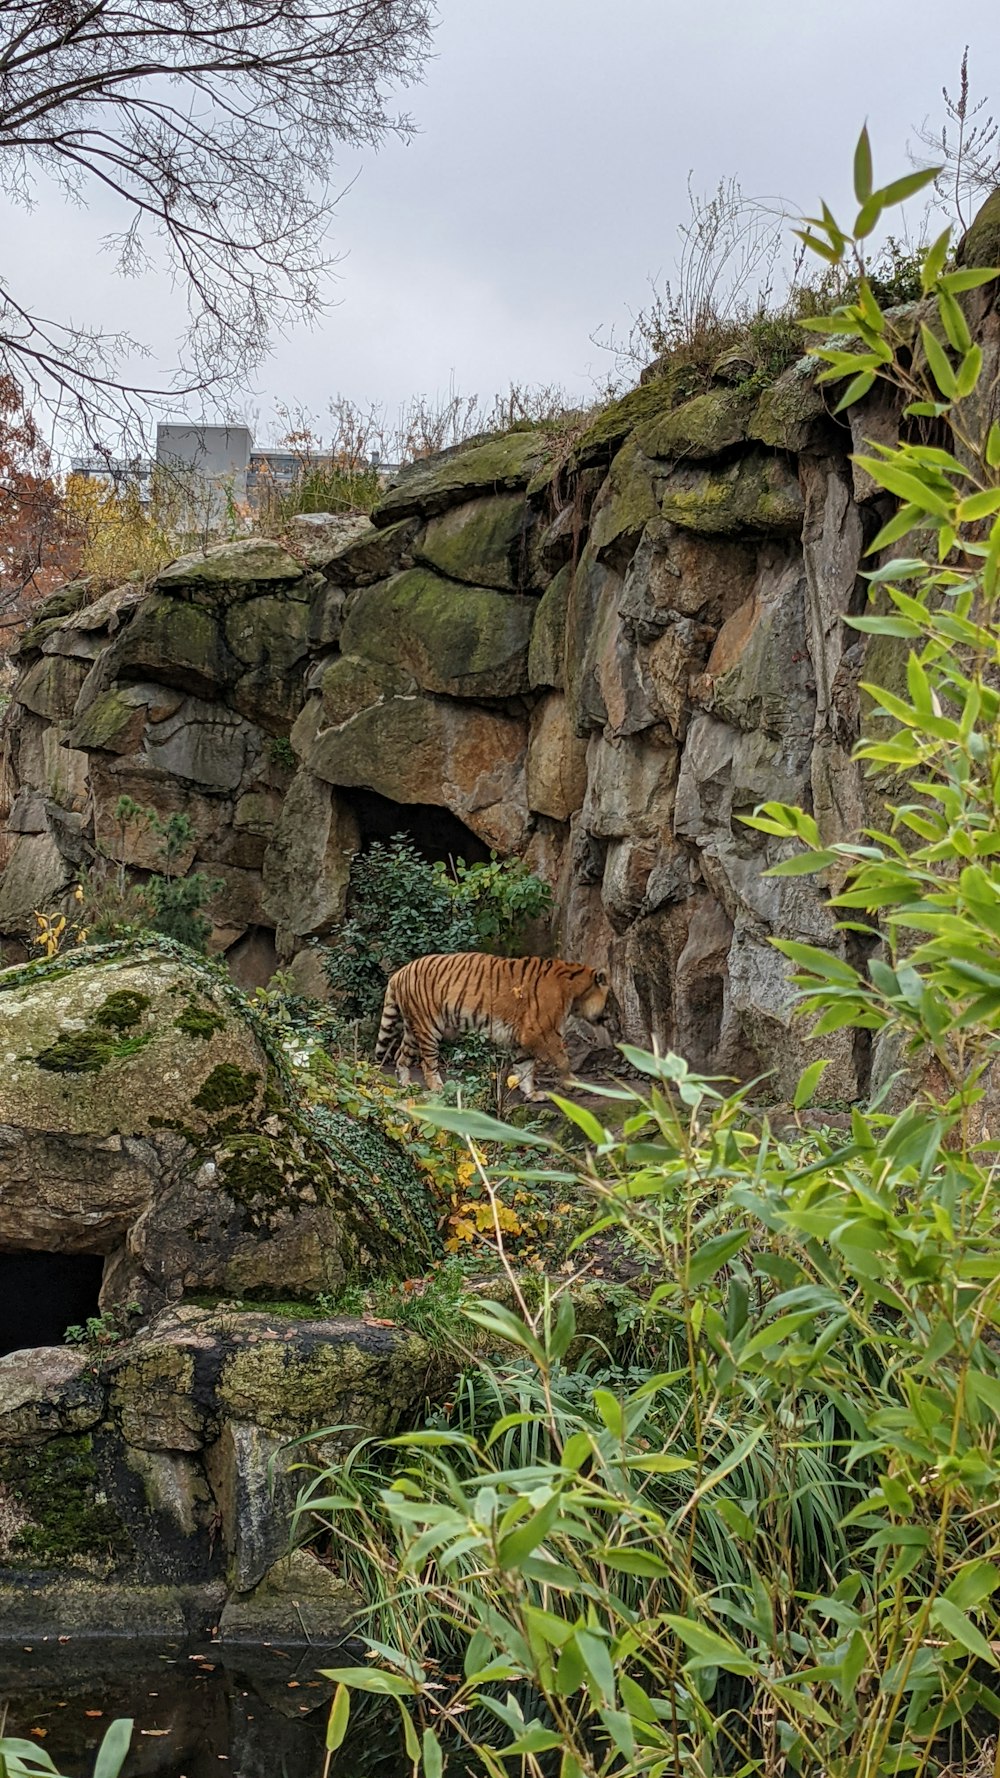 a tiger is standing in a rocky area